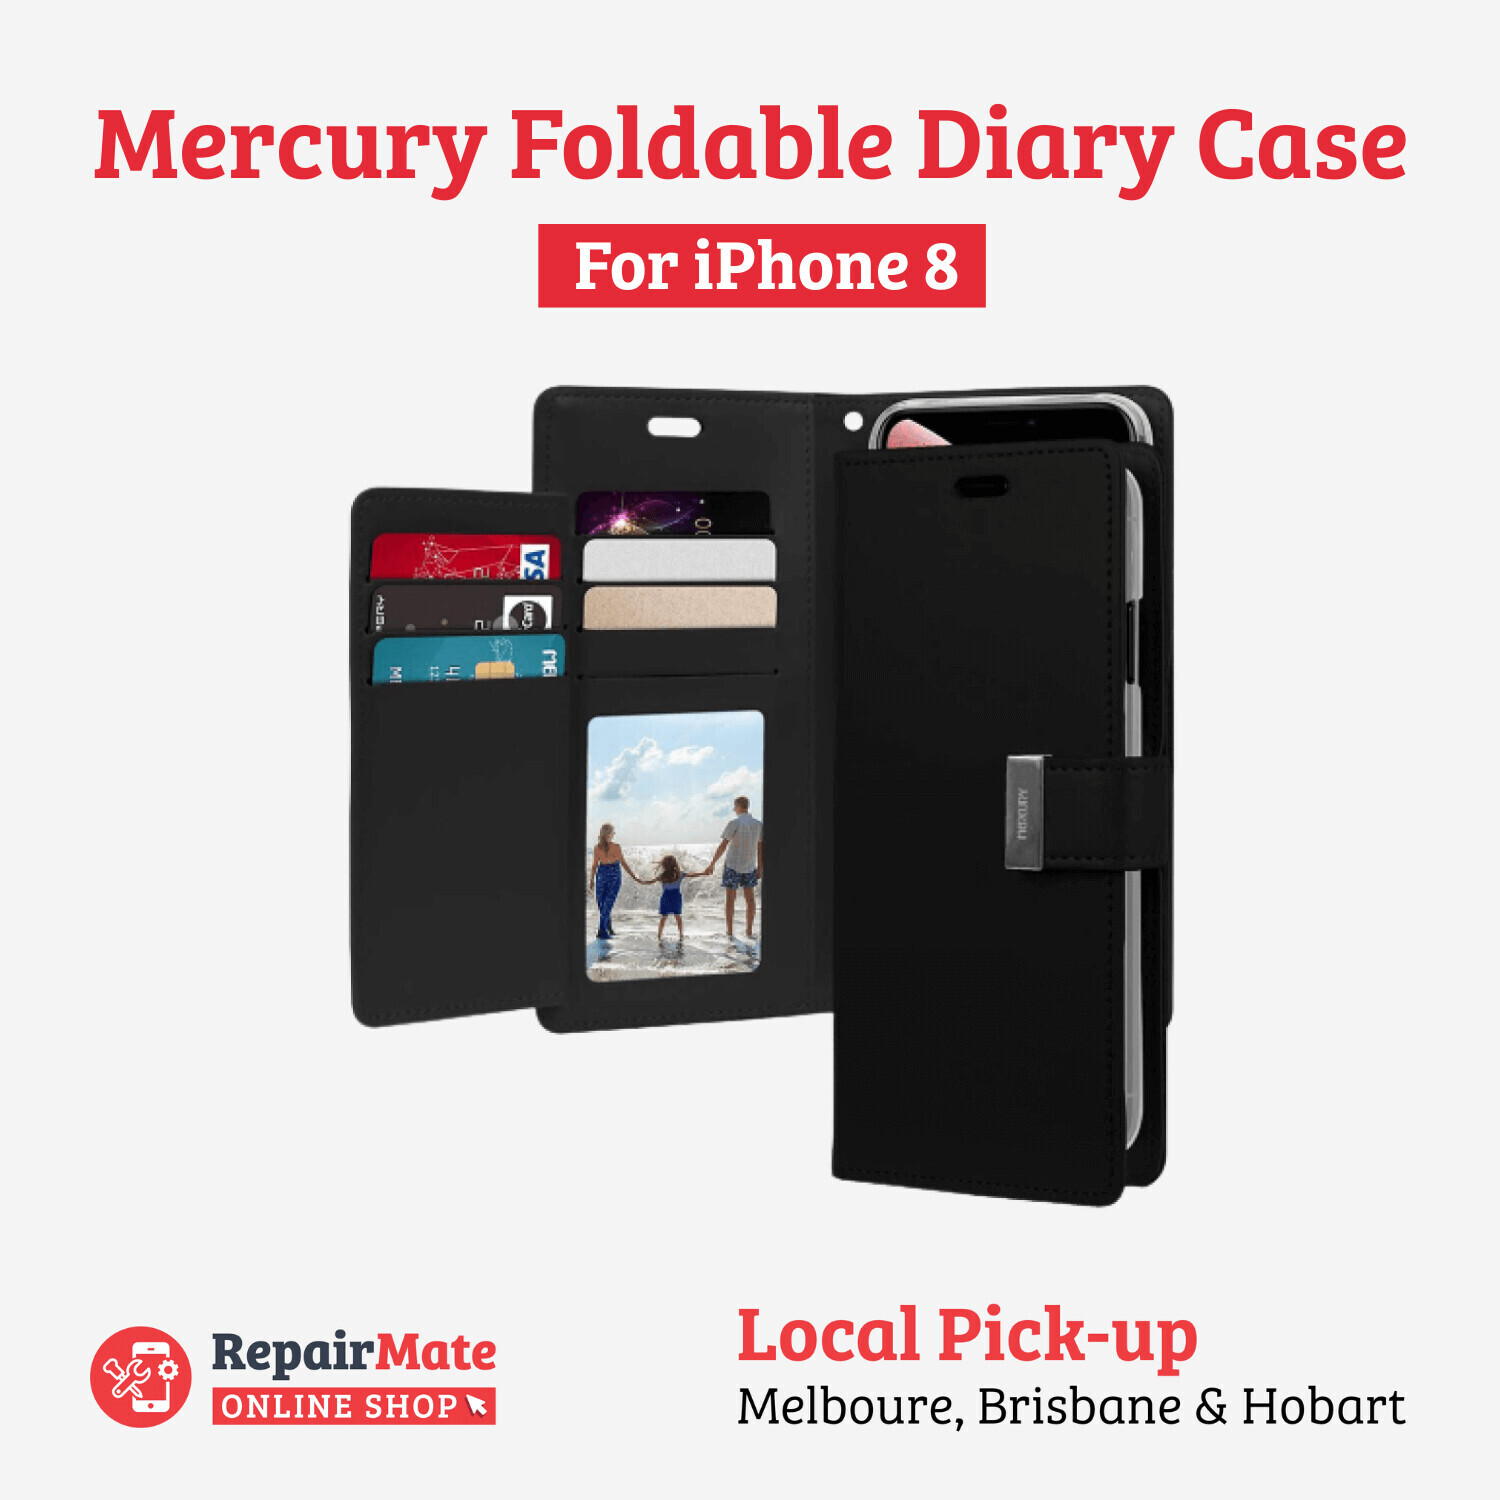 iPhone 8 Mercury Rich Foldable Diary Case